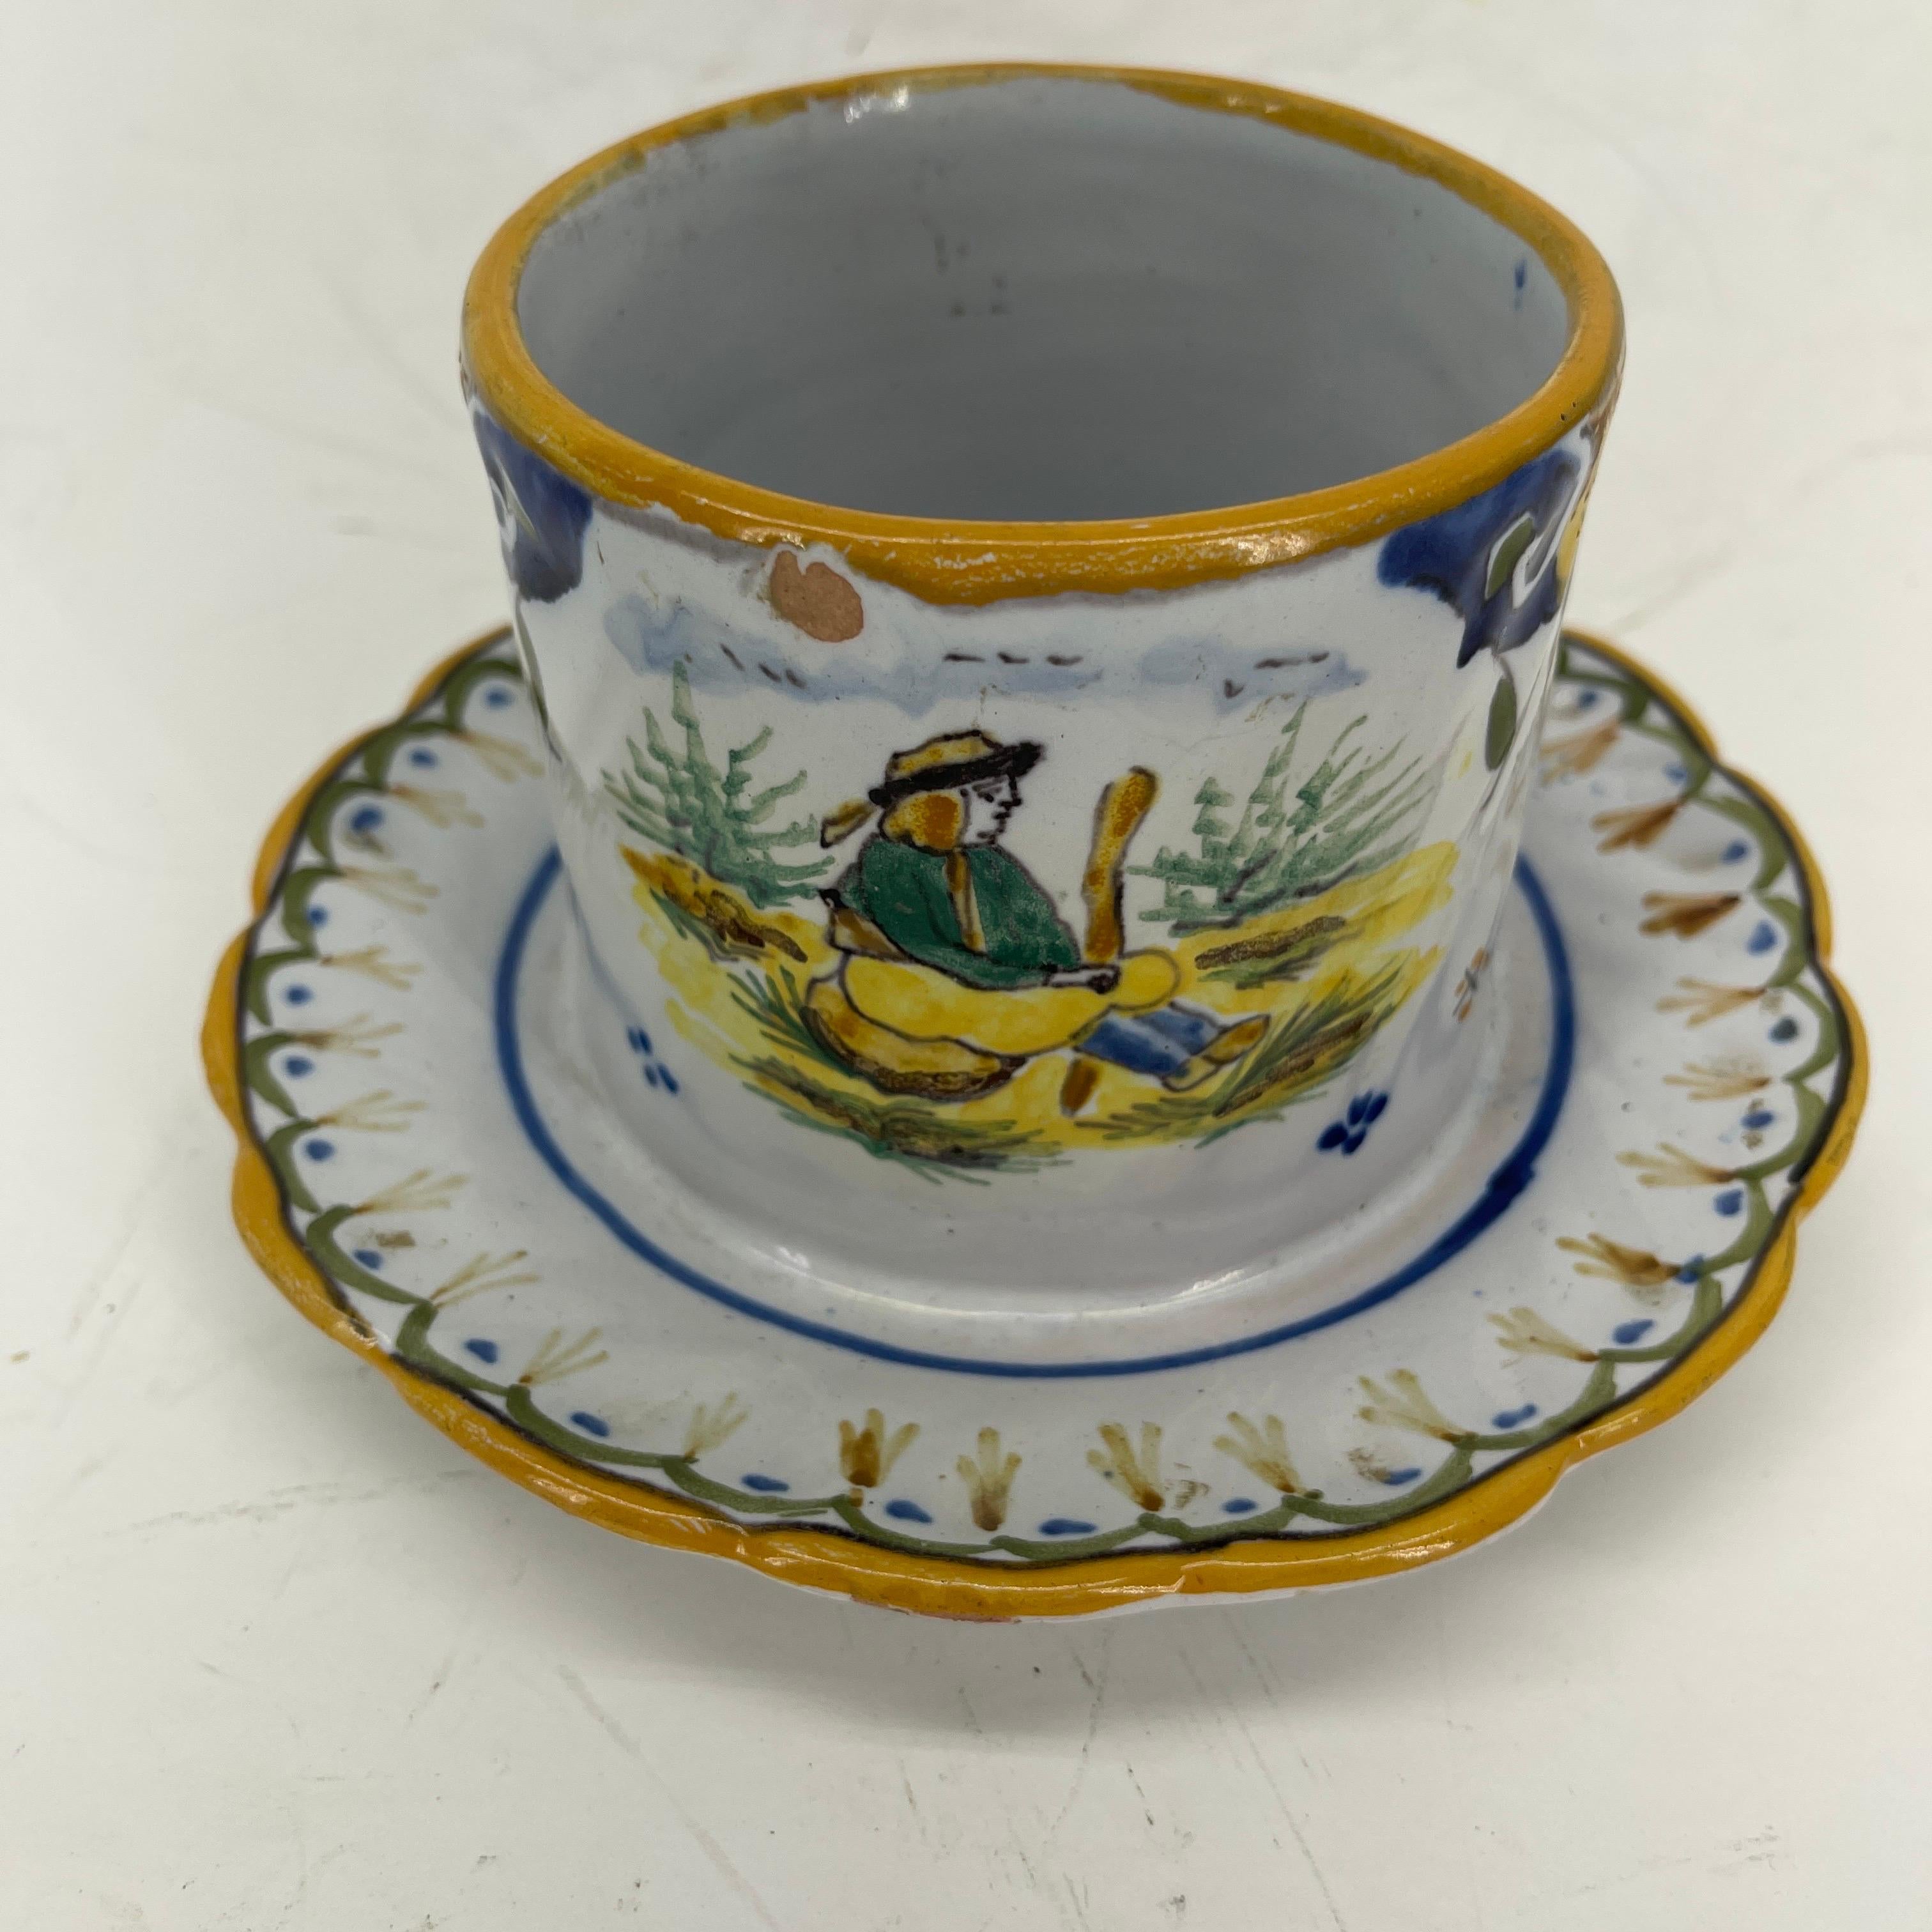 Polychrome Faience Wine Bottle Holder or Coaster, early 20th century France

An amazing and rare wine bottle coaster with blue, yellow and green decoration of a French man sitting. This hand painted piece was purchased many years ago on a buying